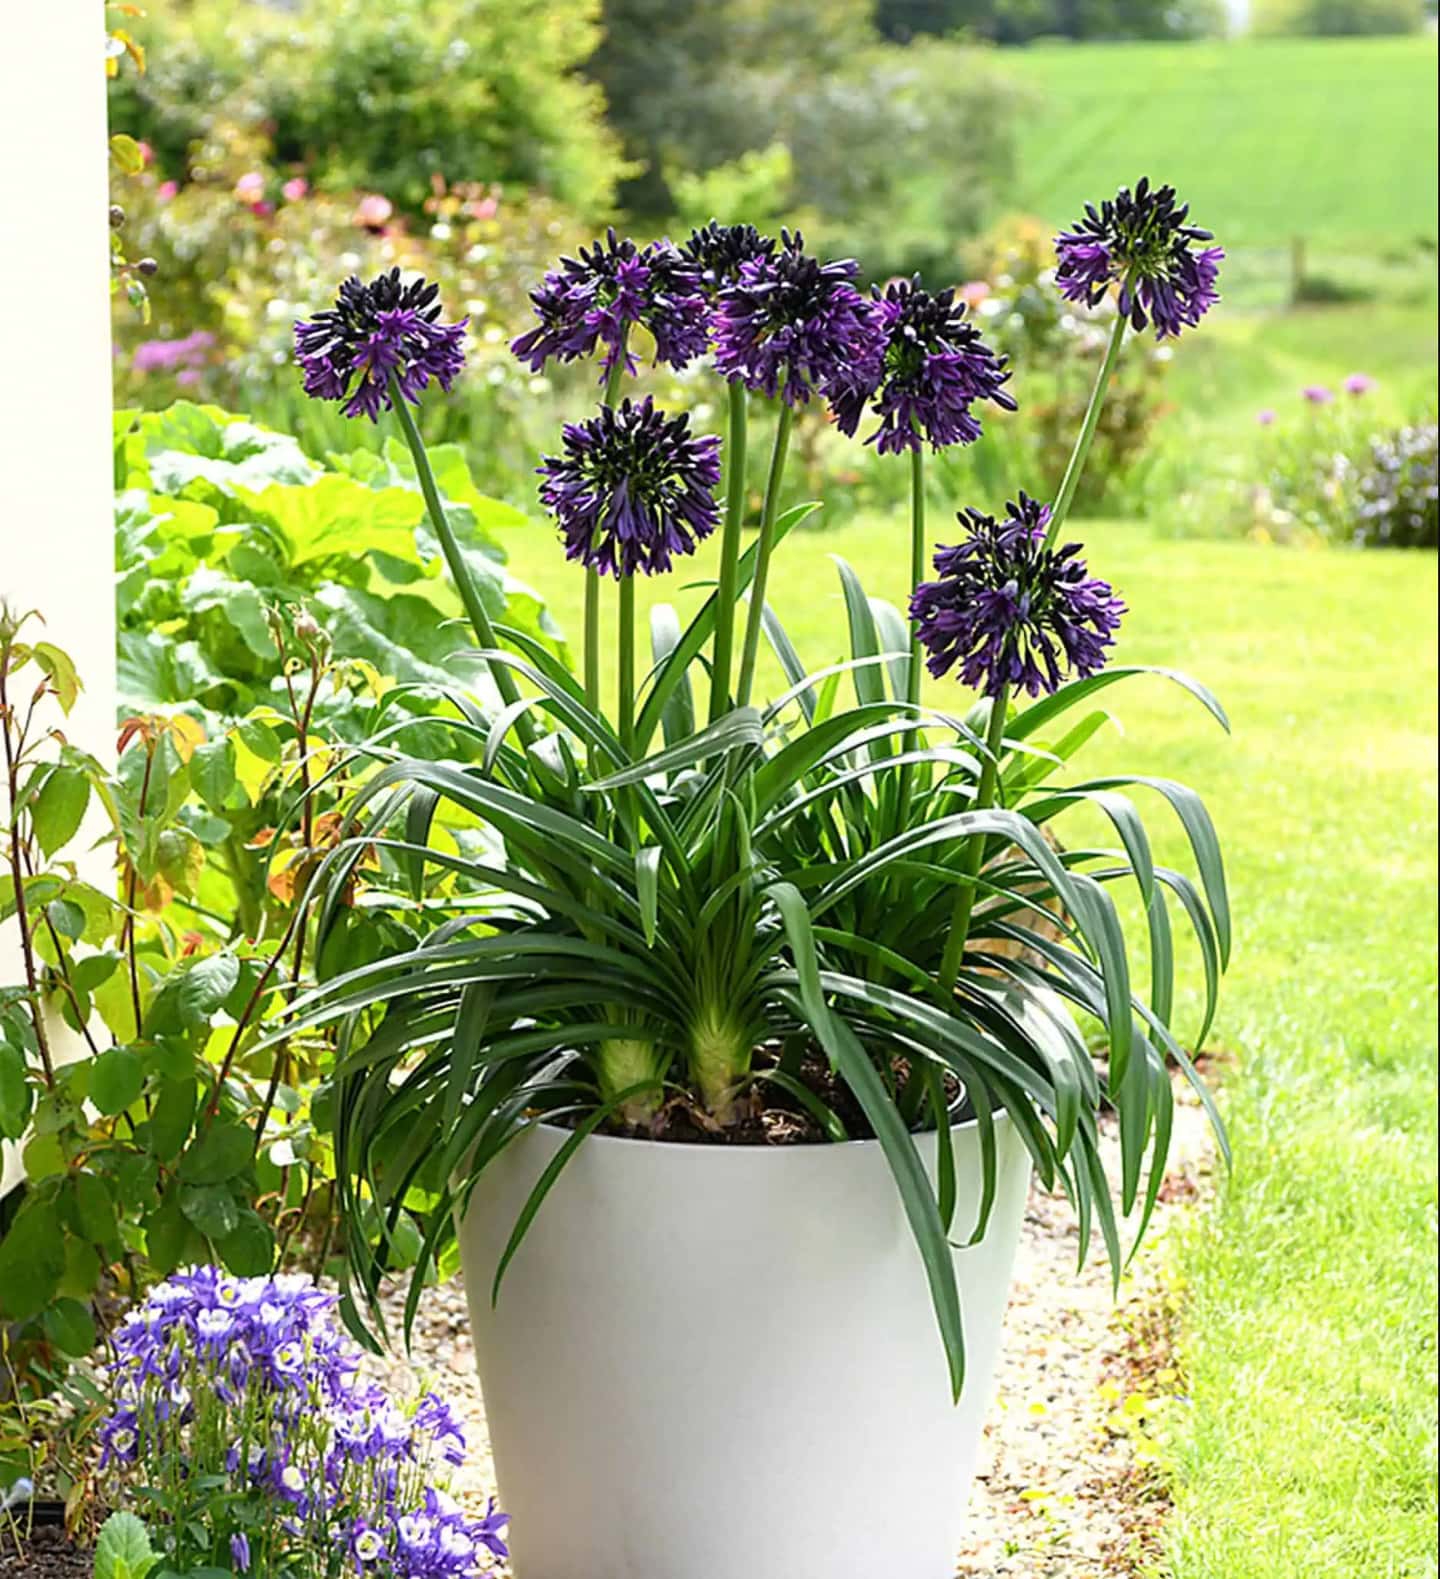 Agapanthus 'Blackjack' blooming in a container